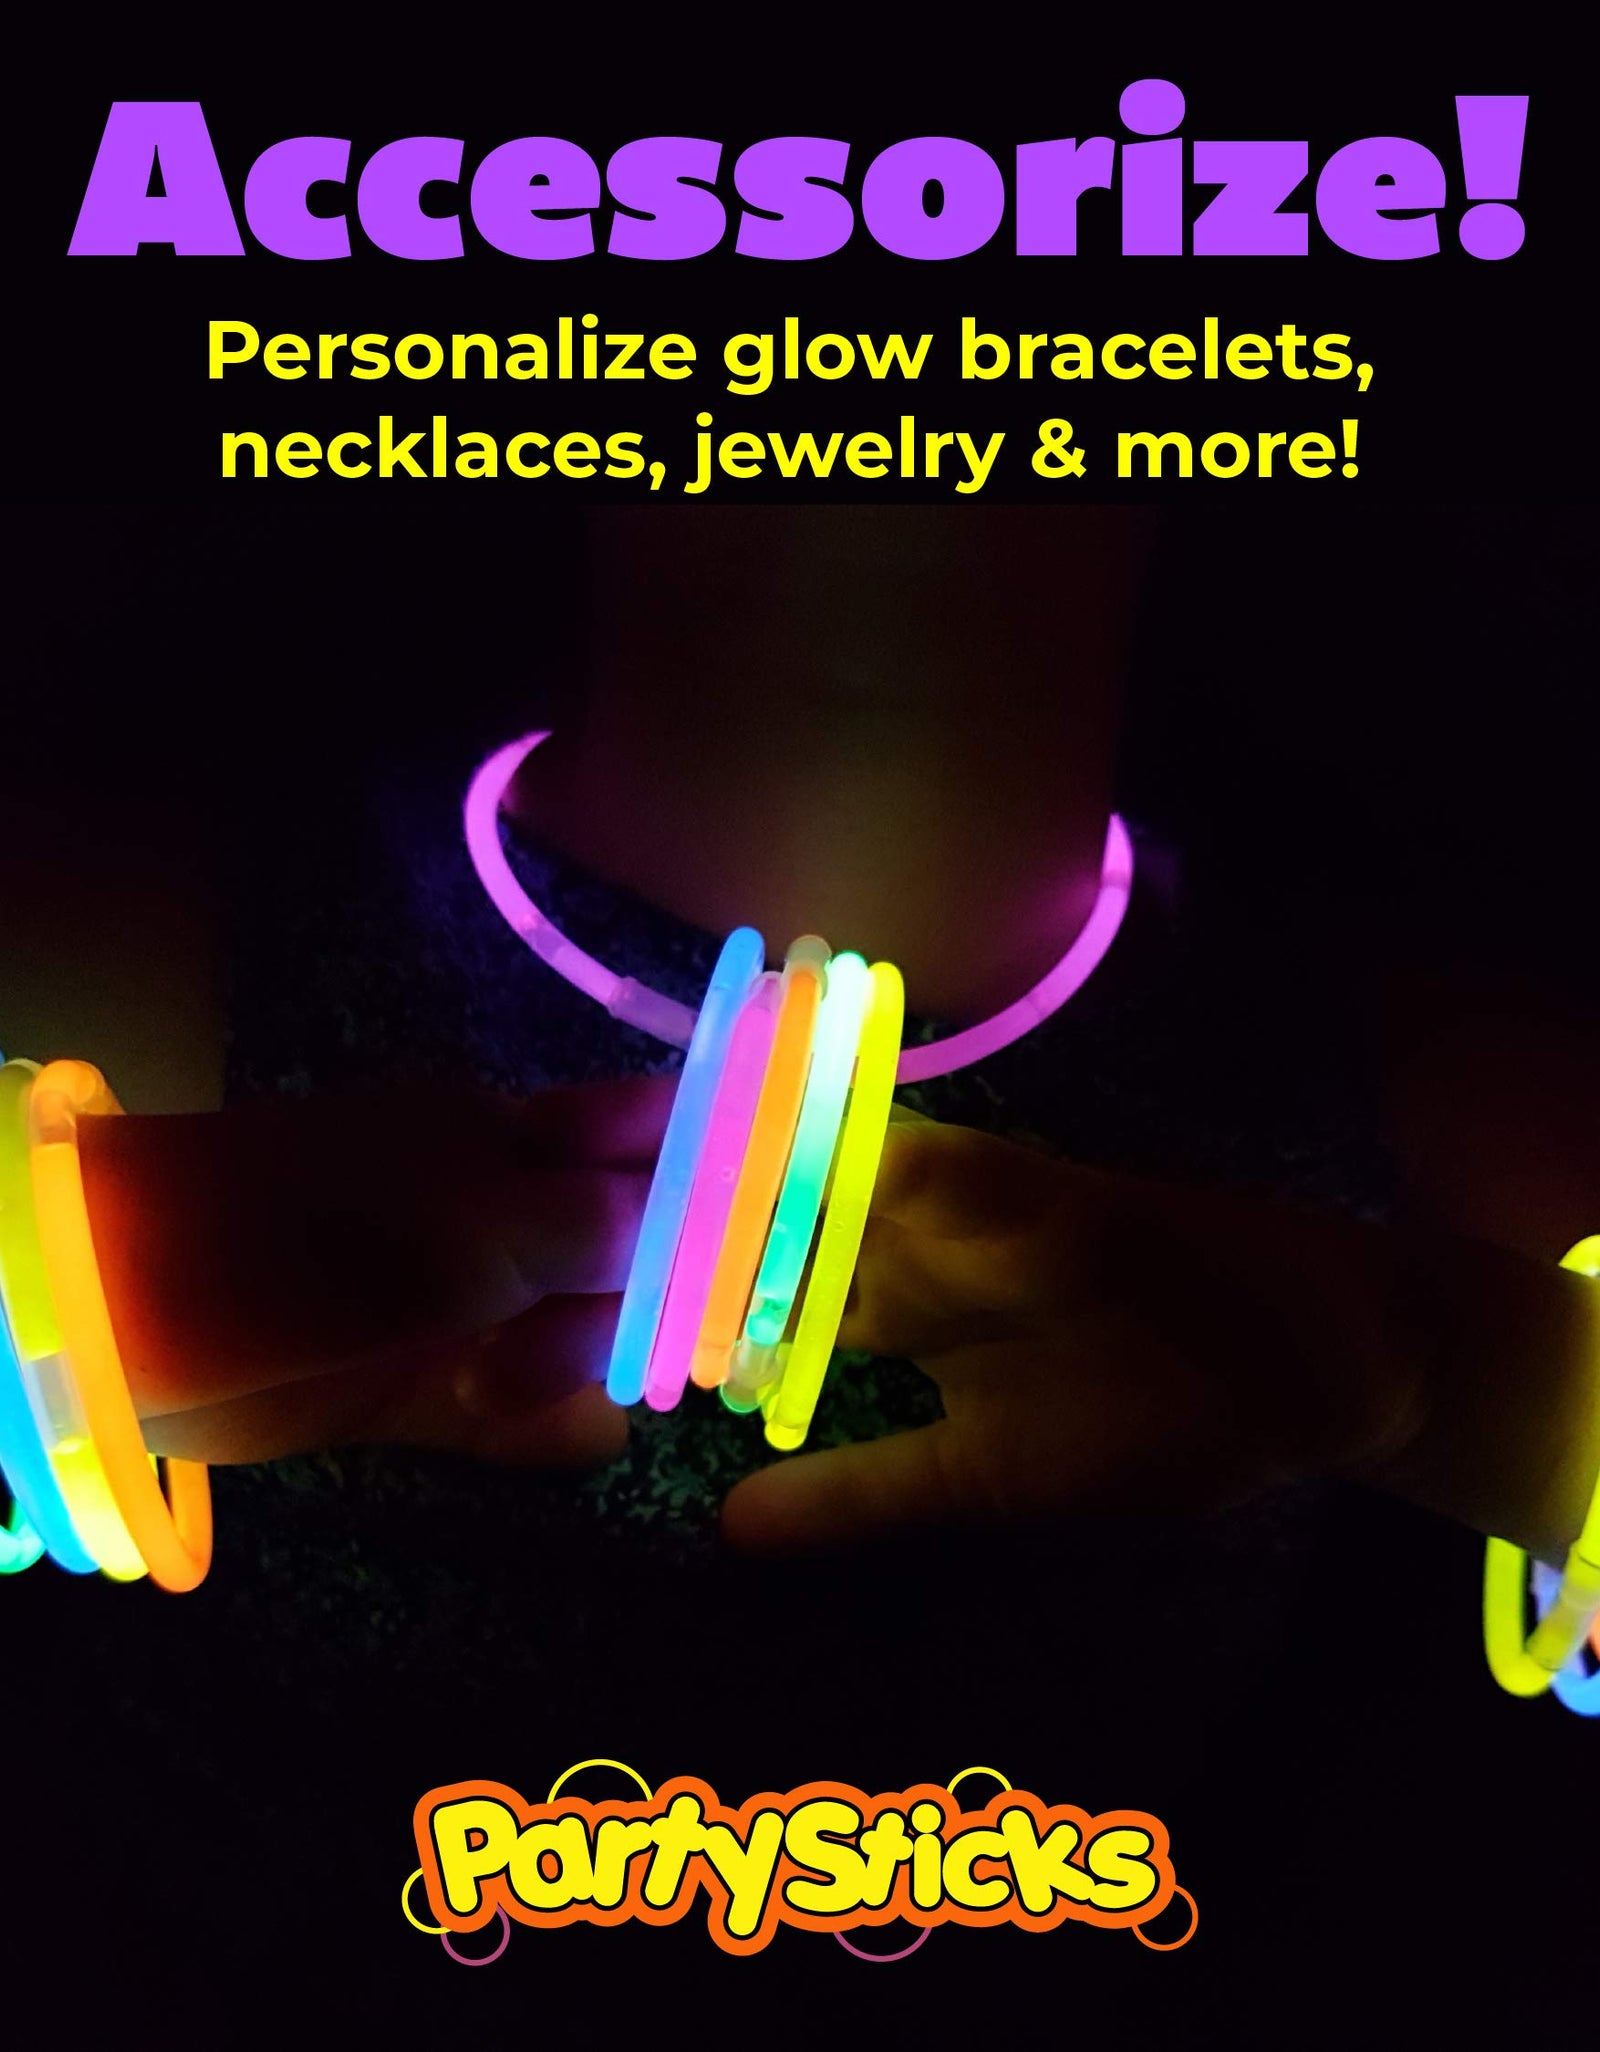 PartySticks Moondance Glow Sticks and Connectors - 40pk Glow in The Dark Party Favors with 16 Glow Sticks Party Decorations and 24 Connectors for Light Up Glasses, Glow Necklaces, Glow Bracelets